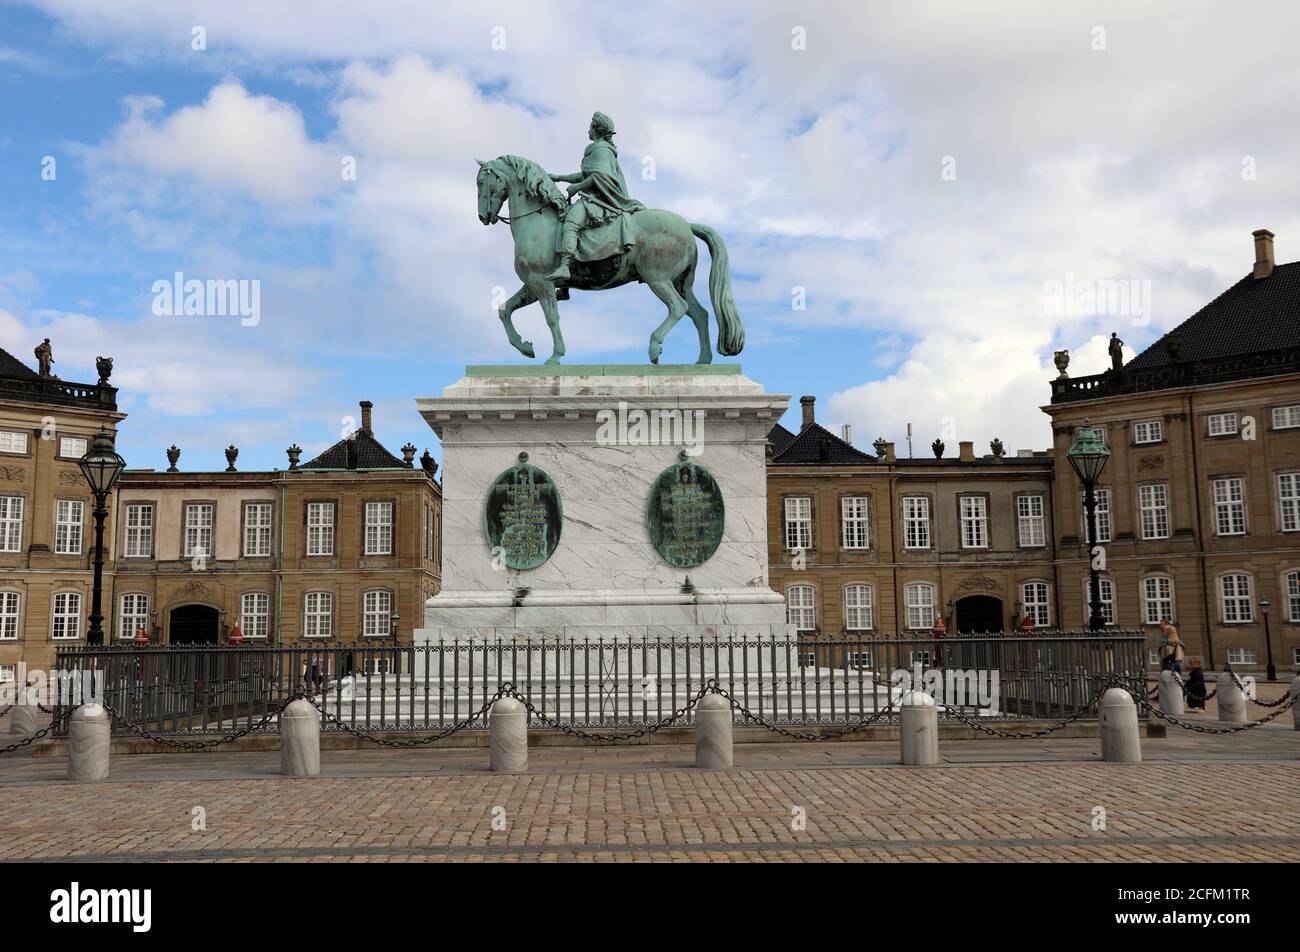 Equestrian statue of King Frederik V at the Amalienborg Palace in ...